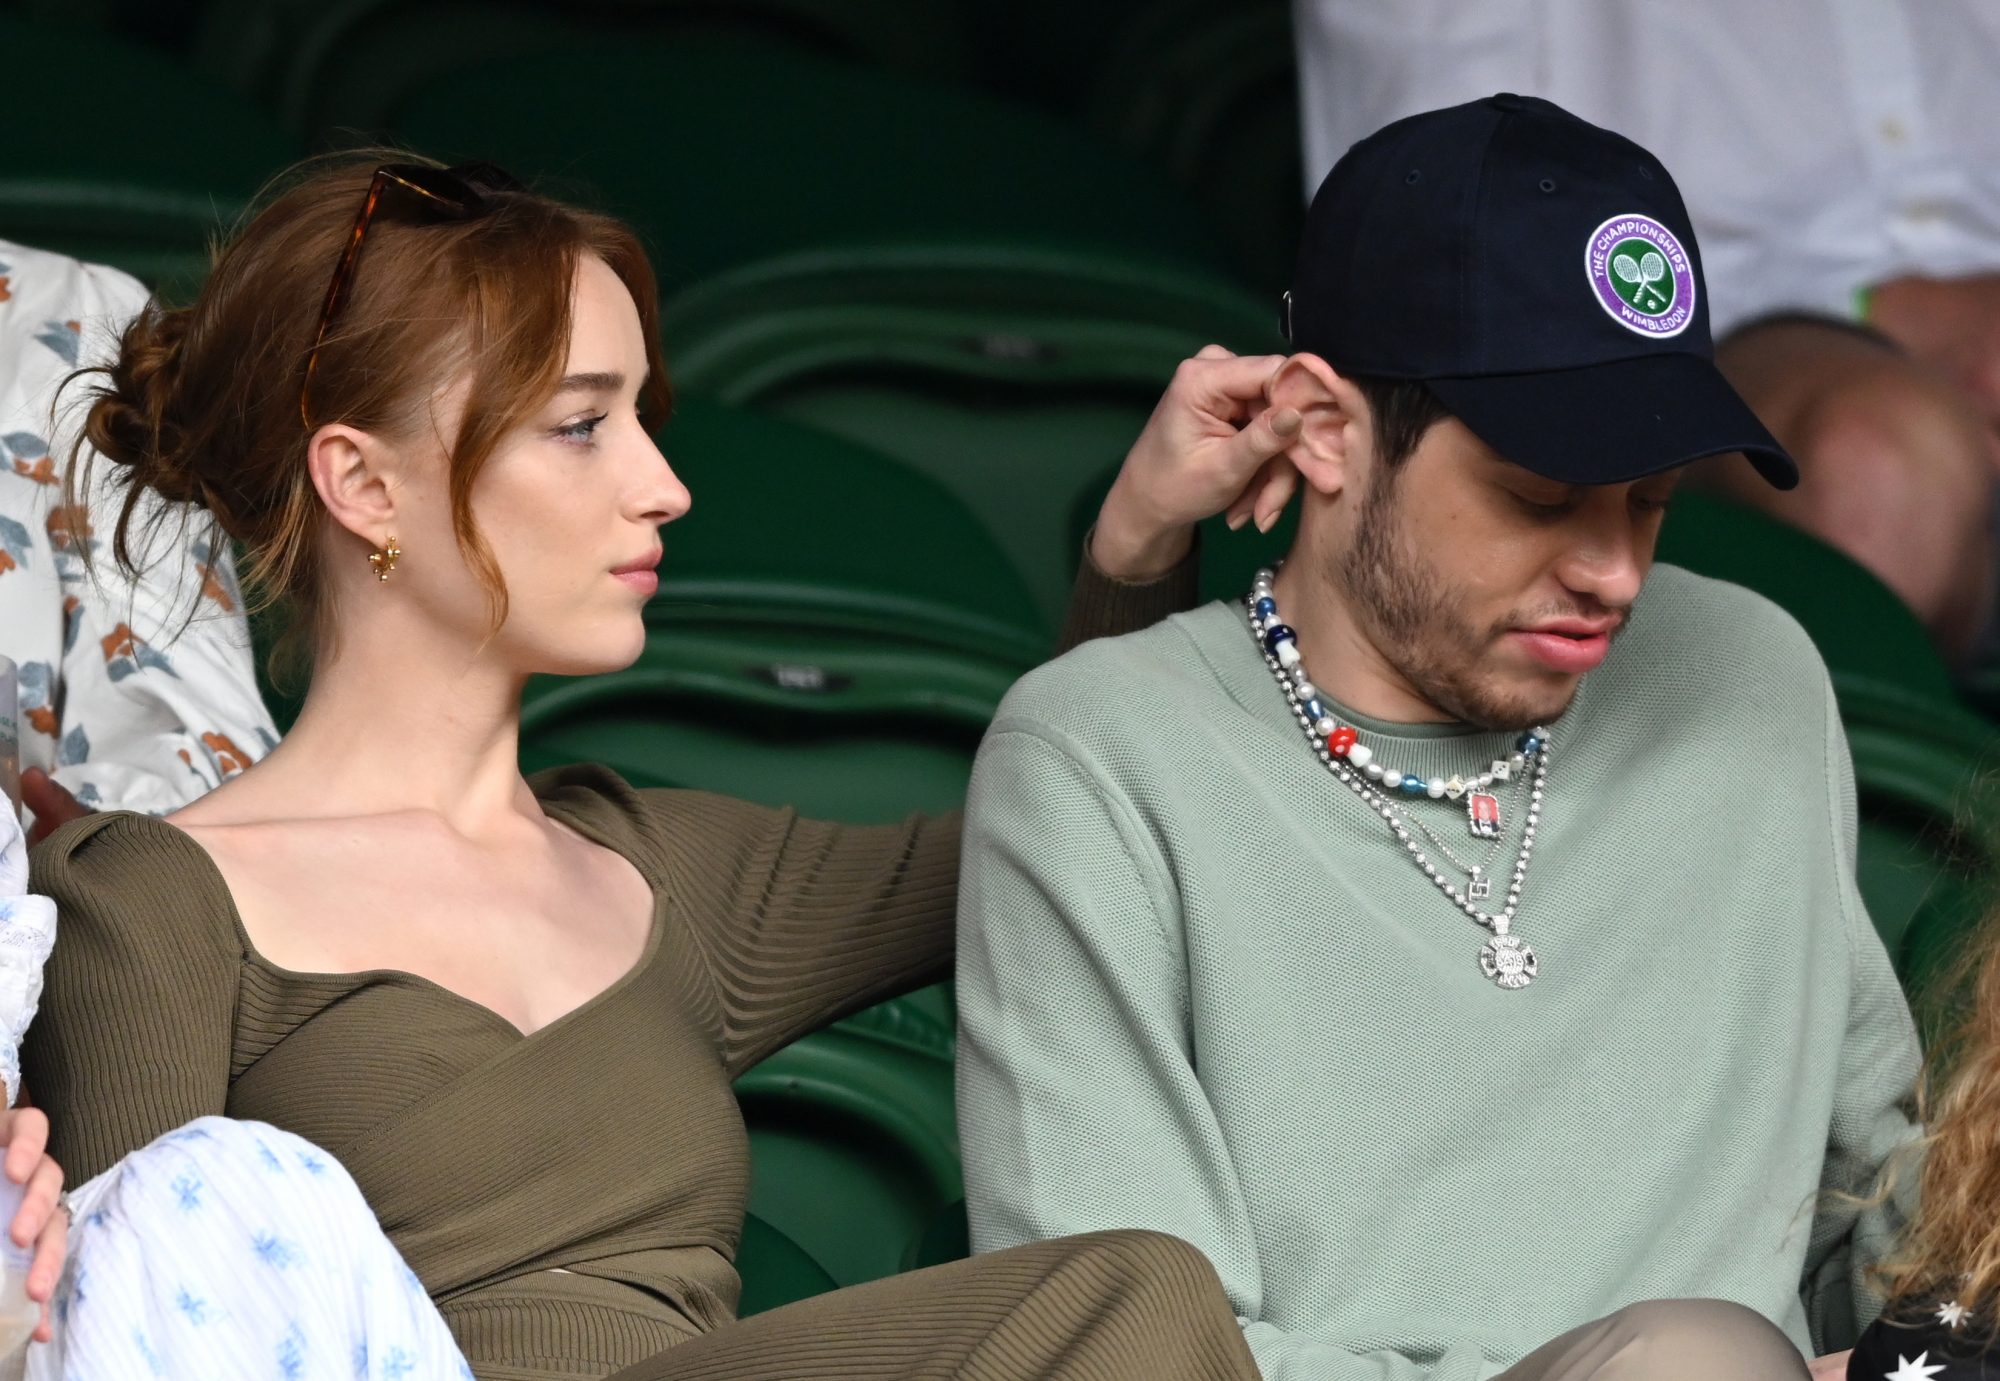 Phoebe Dynevor and Pete Davidson Just Made Their Couple Debut at Wimbledon